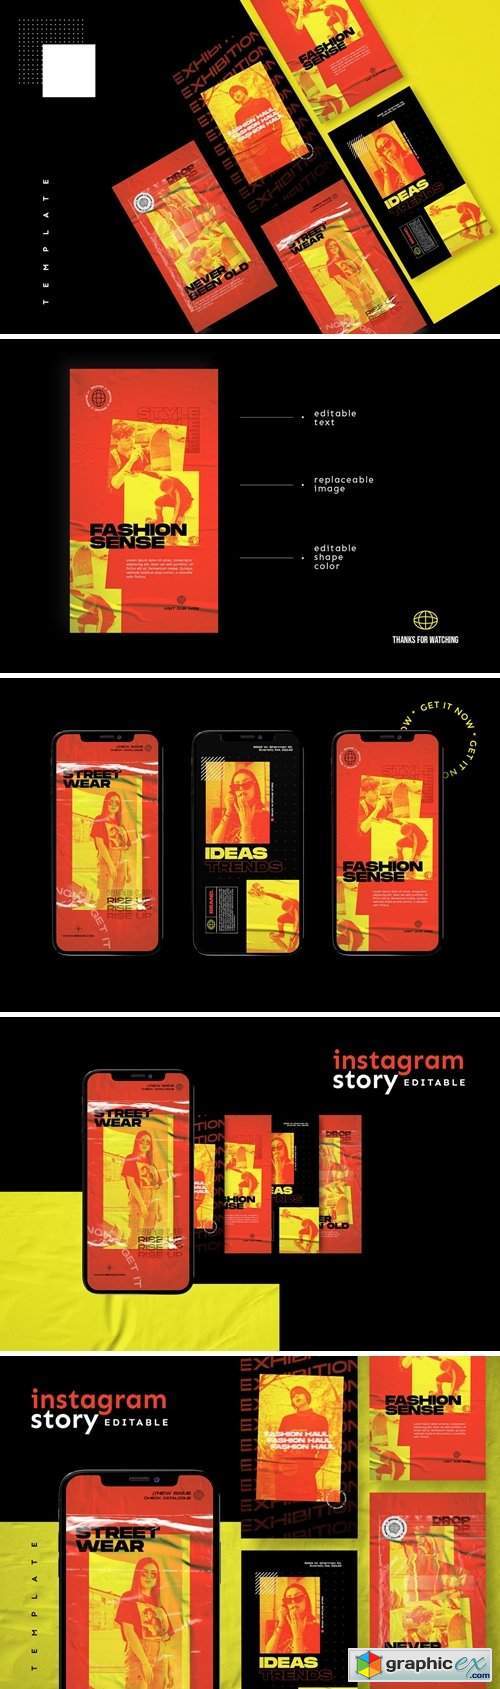 Instagram Story Template 3663078